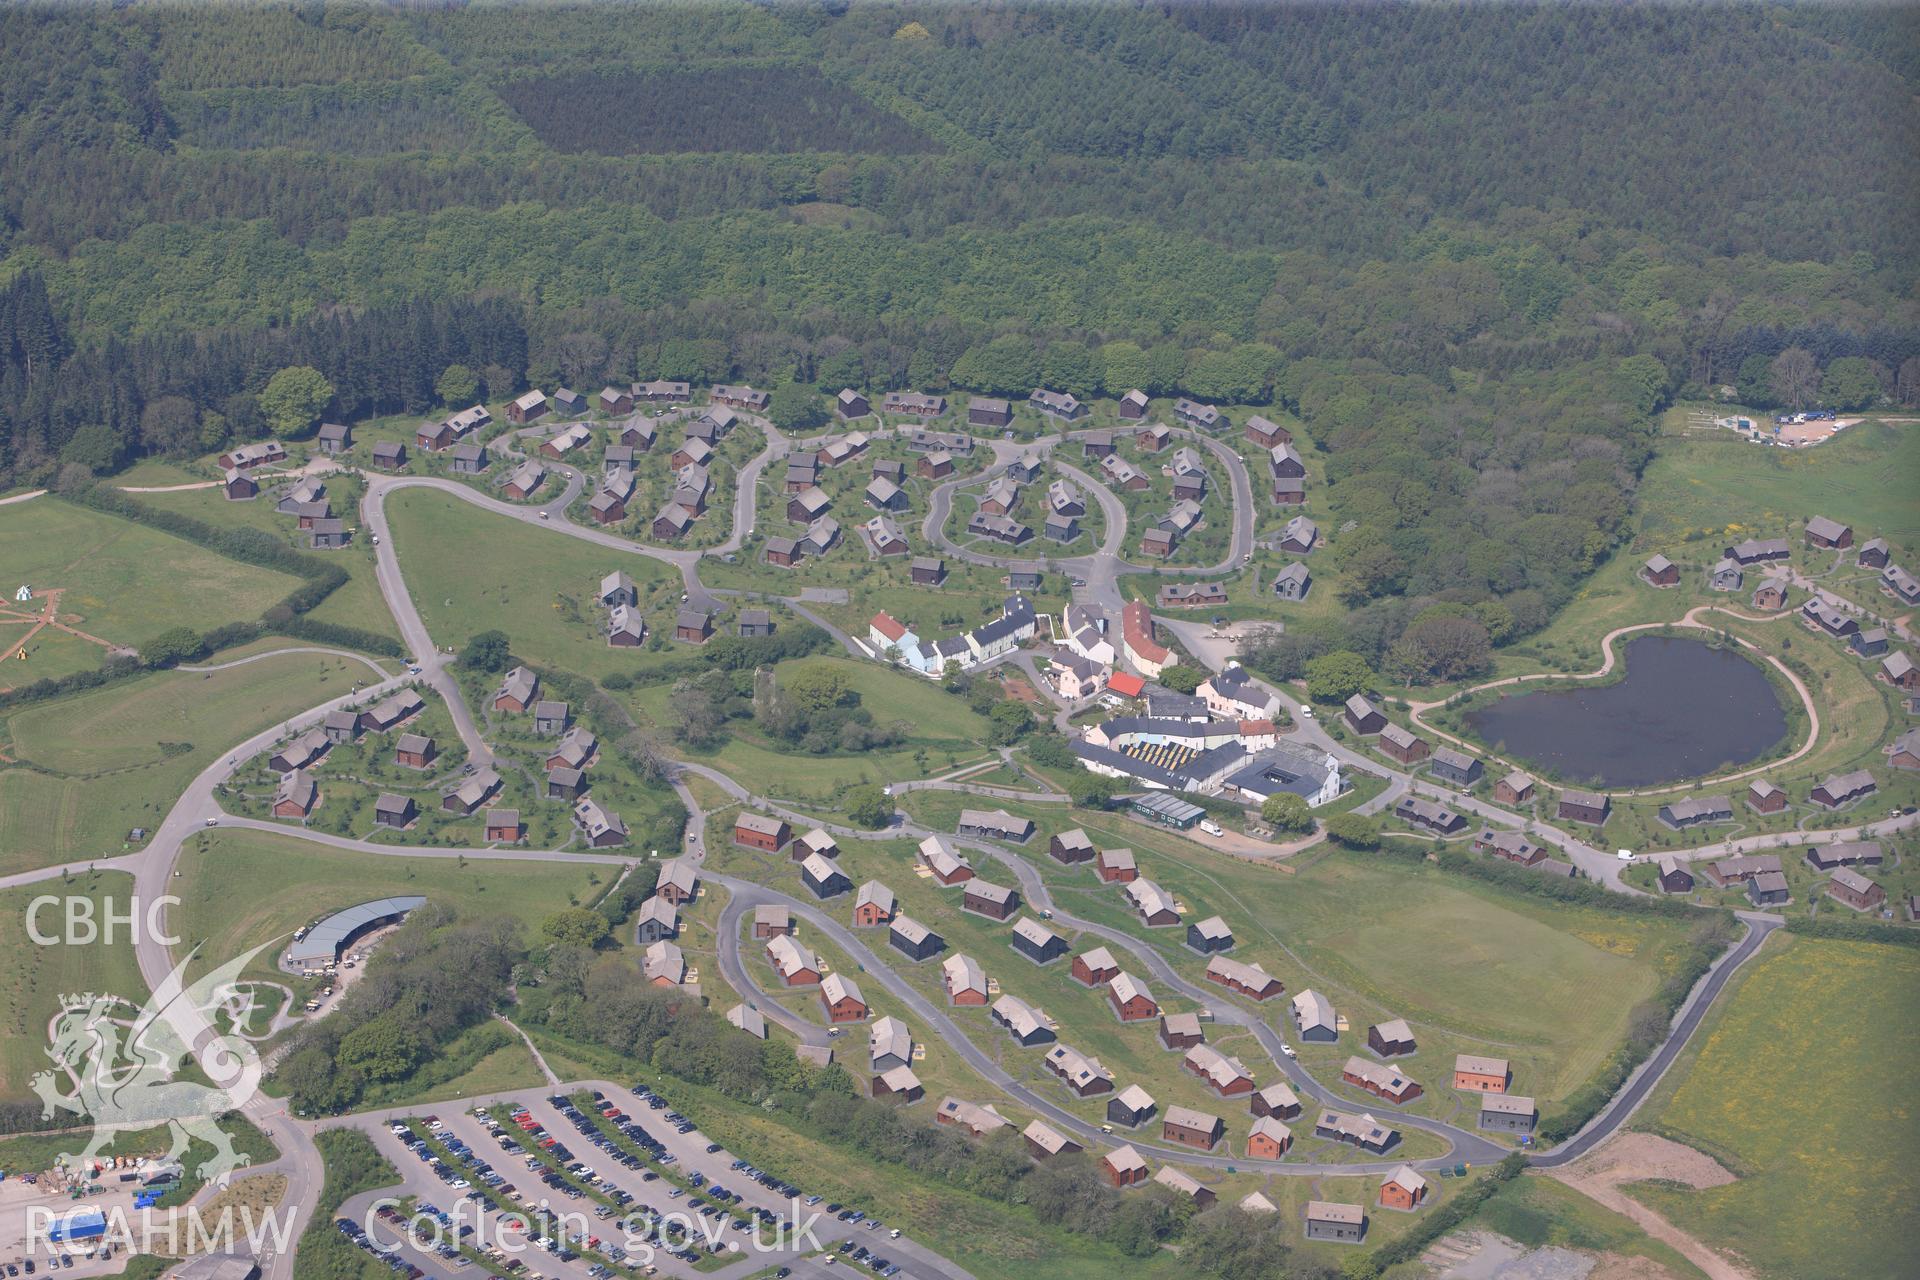 RCAHMW colour oblique photograph of General view of Bluestone holiday village, looking west. Taken by Toby Driver on 24/05/2012.